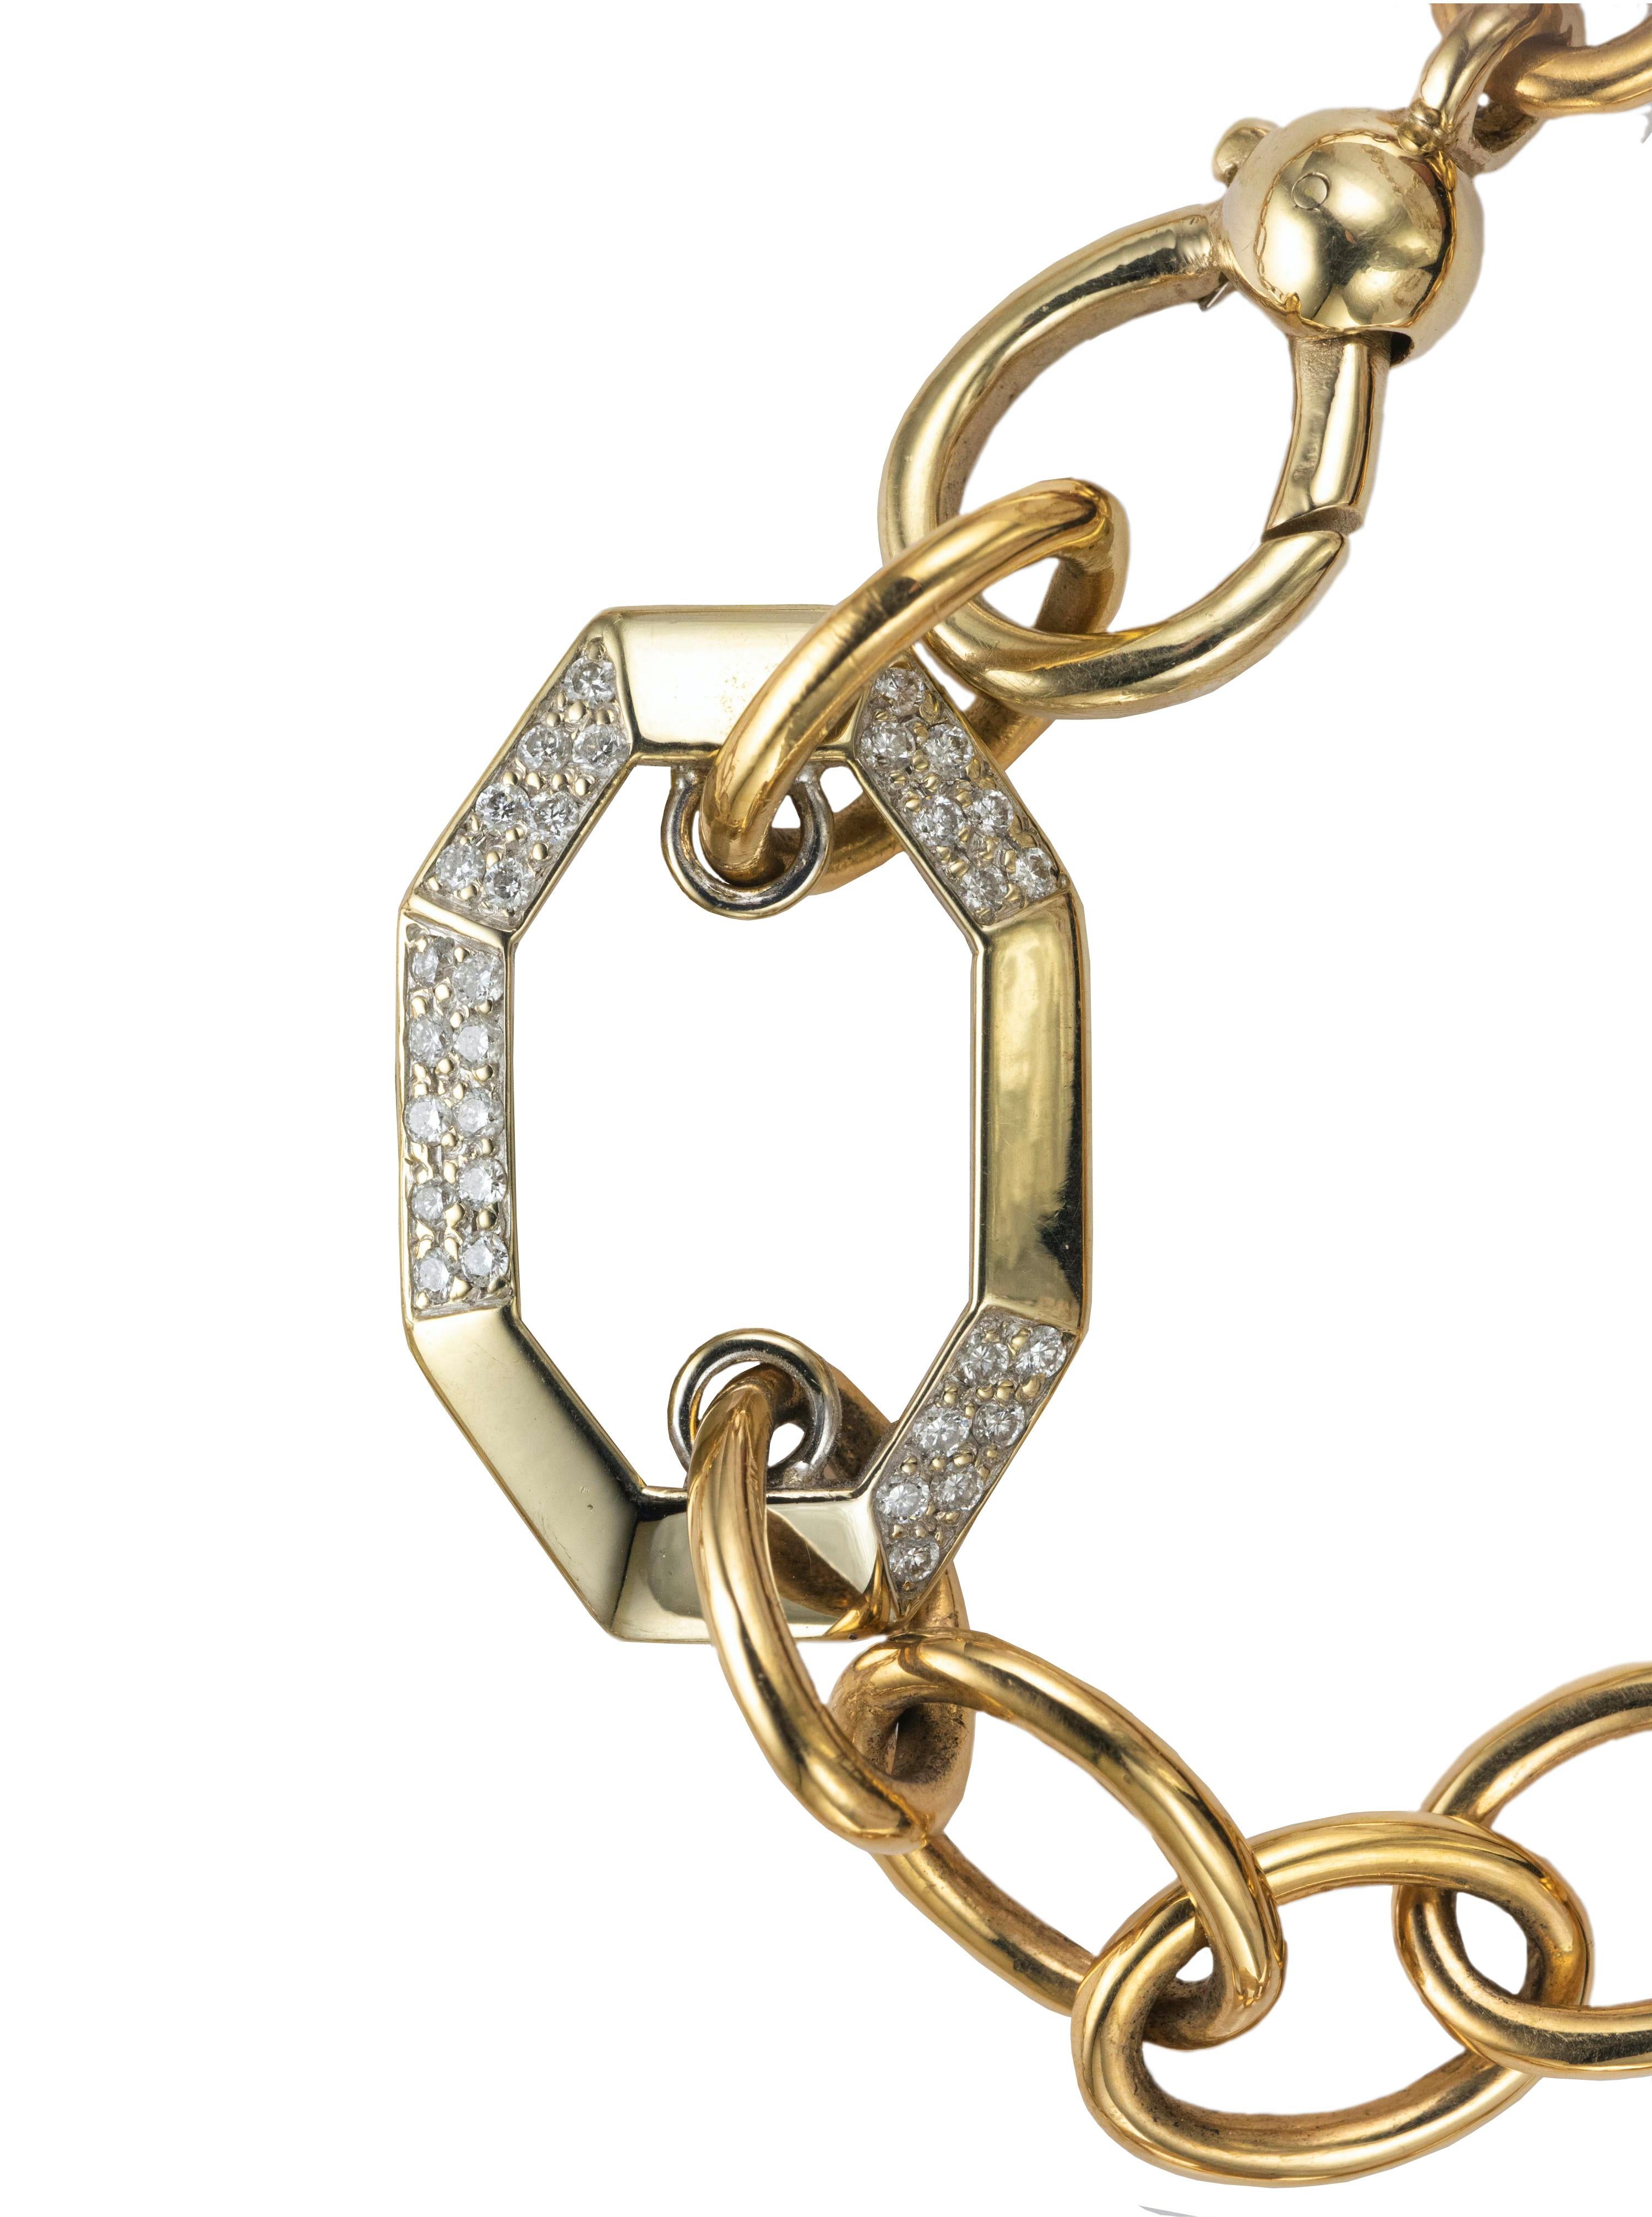 A solid chain composed of three different links.
An oval link, an octagonal brushed yellow gold link and an elongated octagonal diamond link in natural white gold.
The same form came for both bracelet and chain.
The hidden lobster clasp permit you